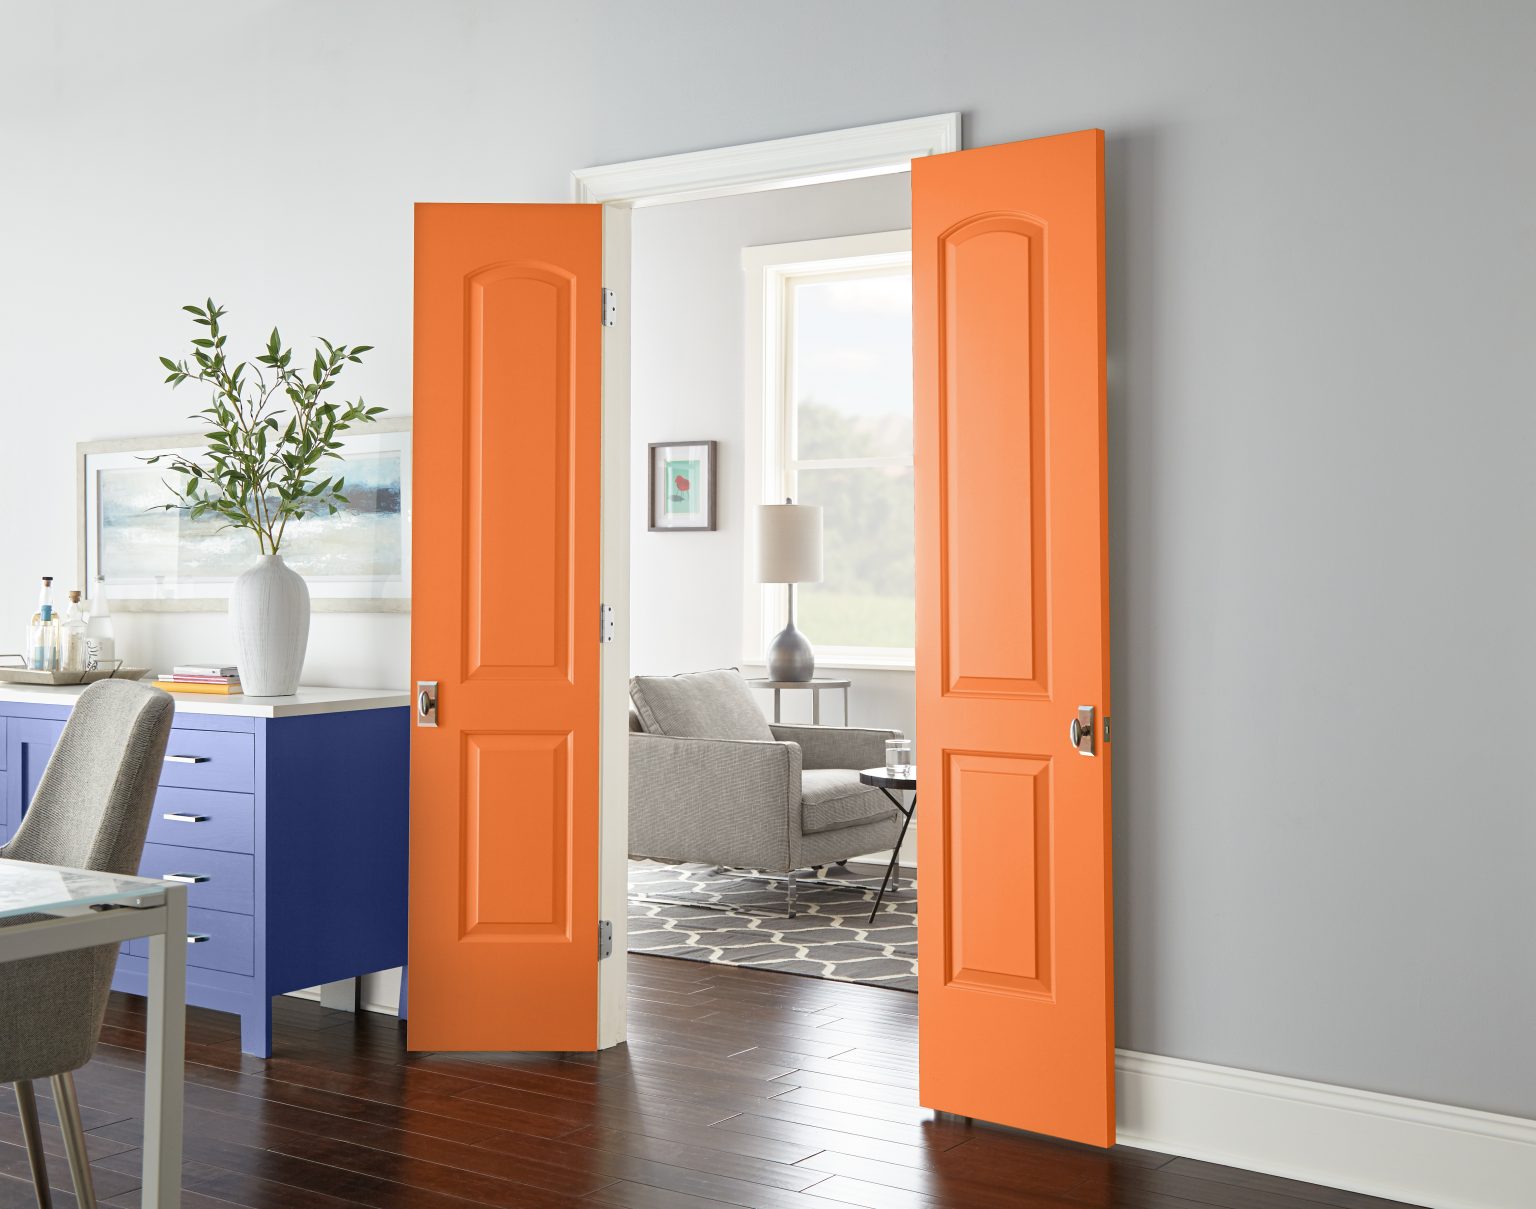 A dining room with a console in the colour Lavender Sky and doors in the colour Tart Orange opening into a living room area